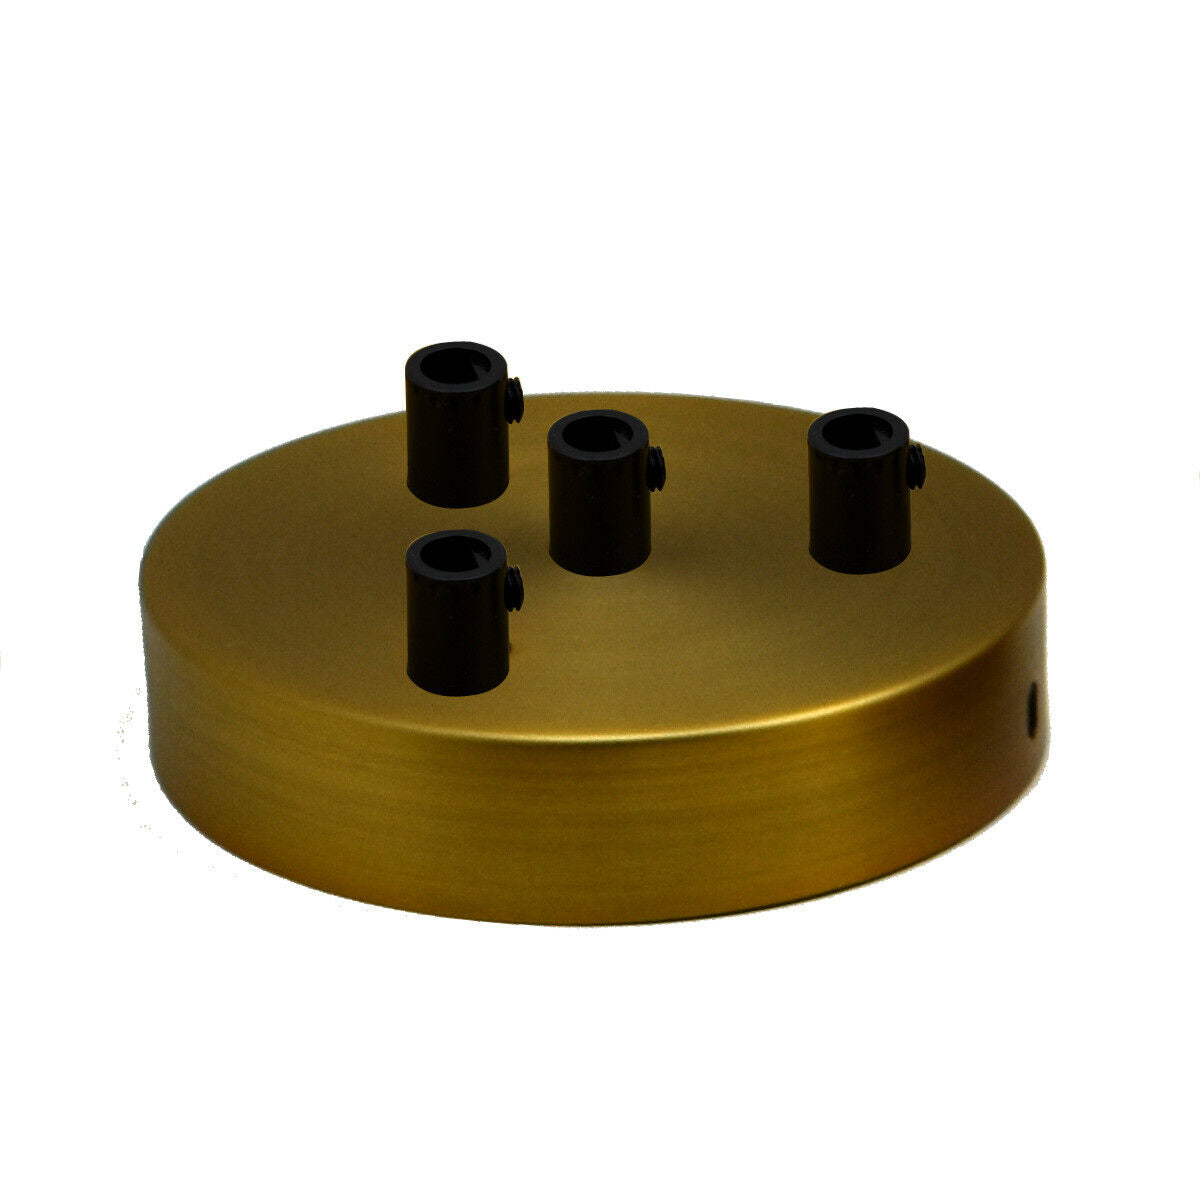 4 Outlet Yellow Brass Metal Ceiling Rose 120x25mm - Shop for LED lights - Transformers - Lampshades - Holders | LEDSone UK